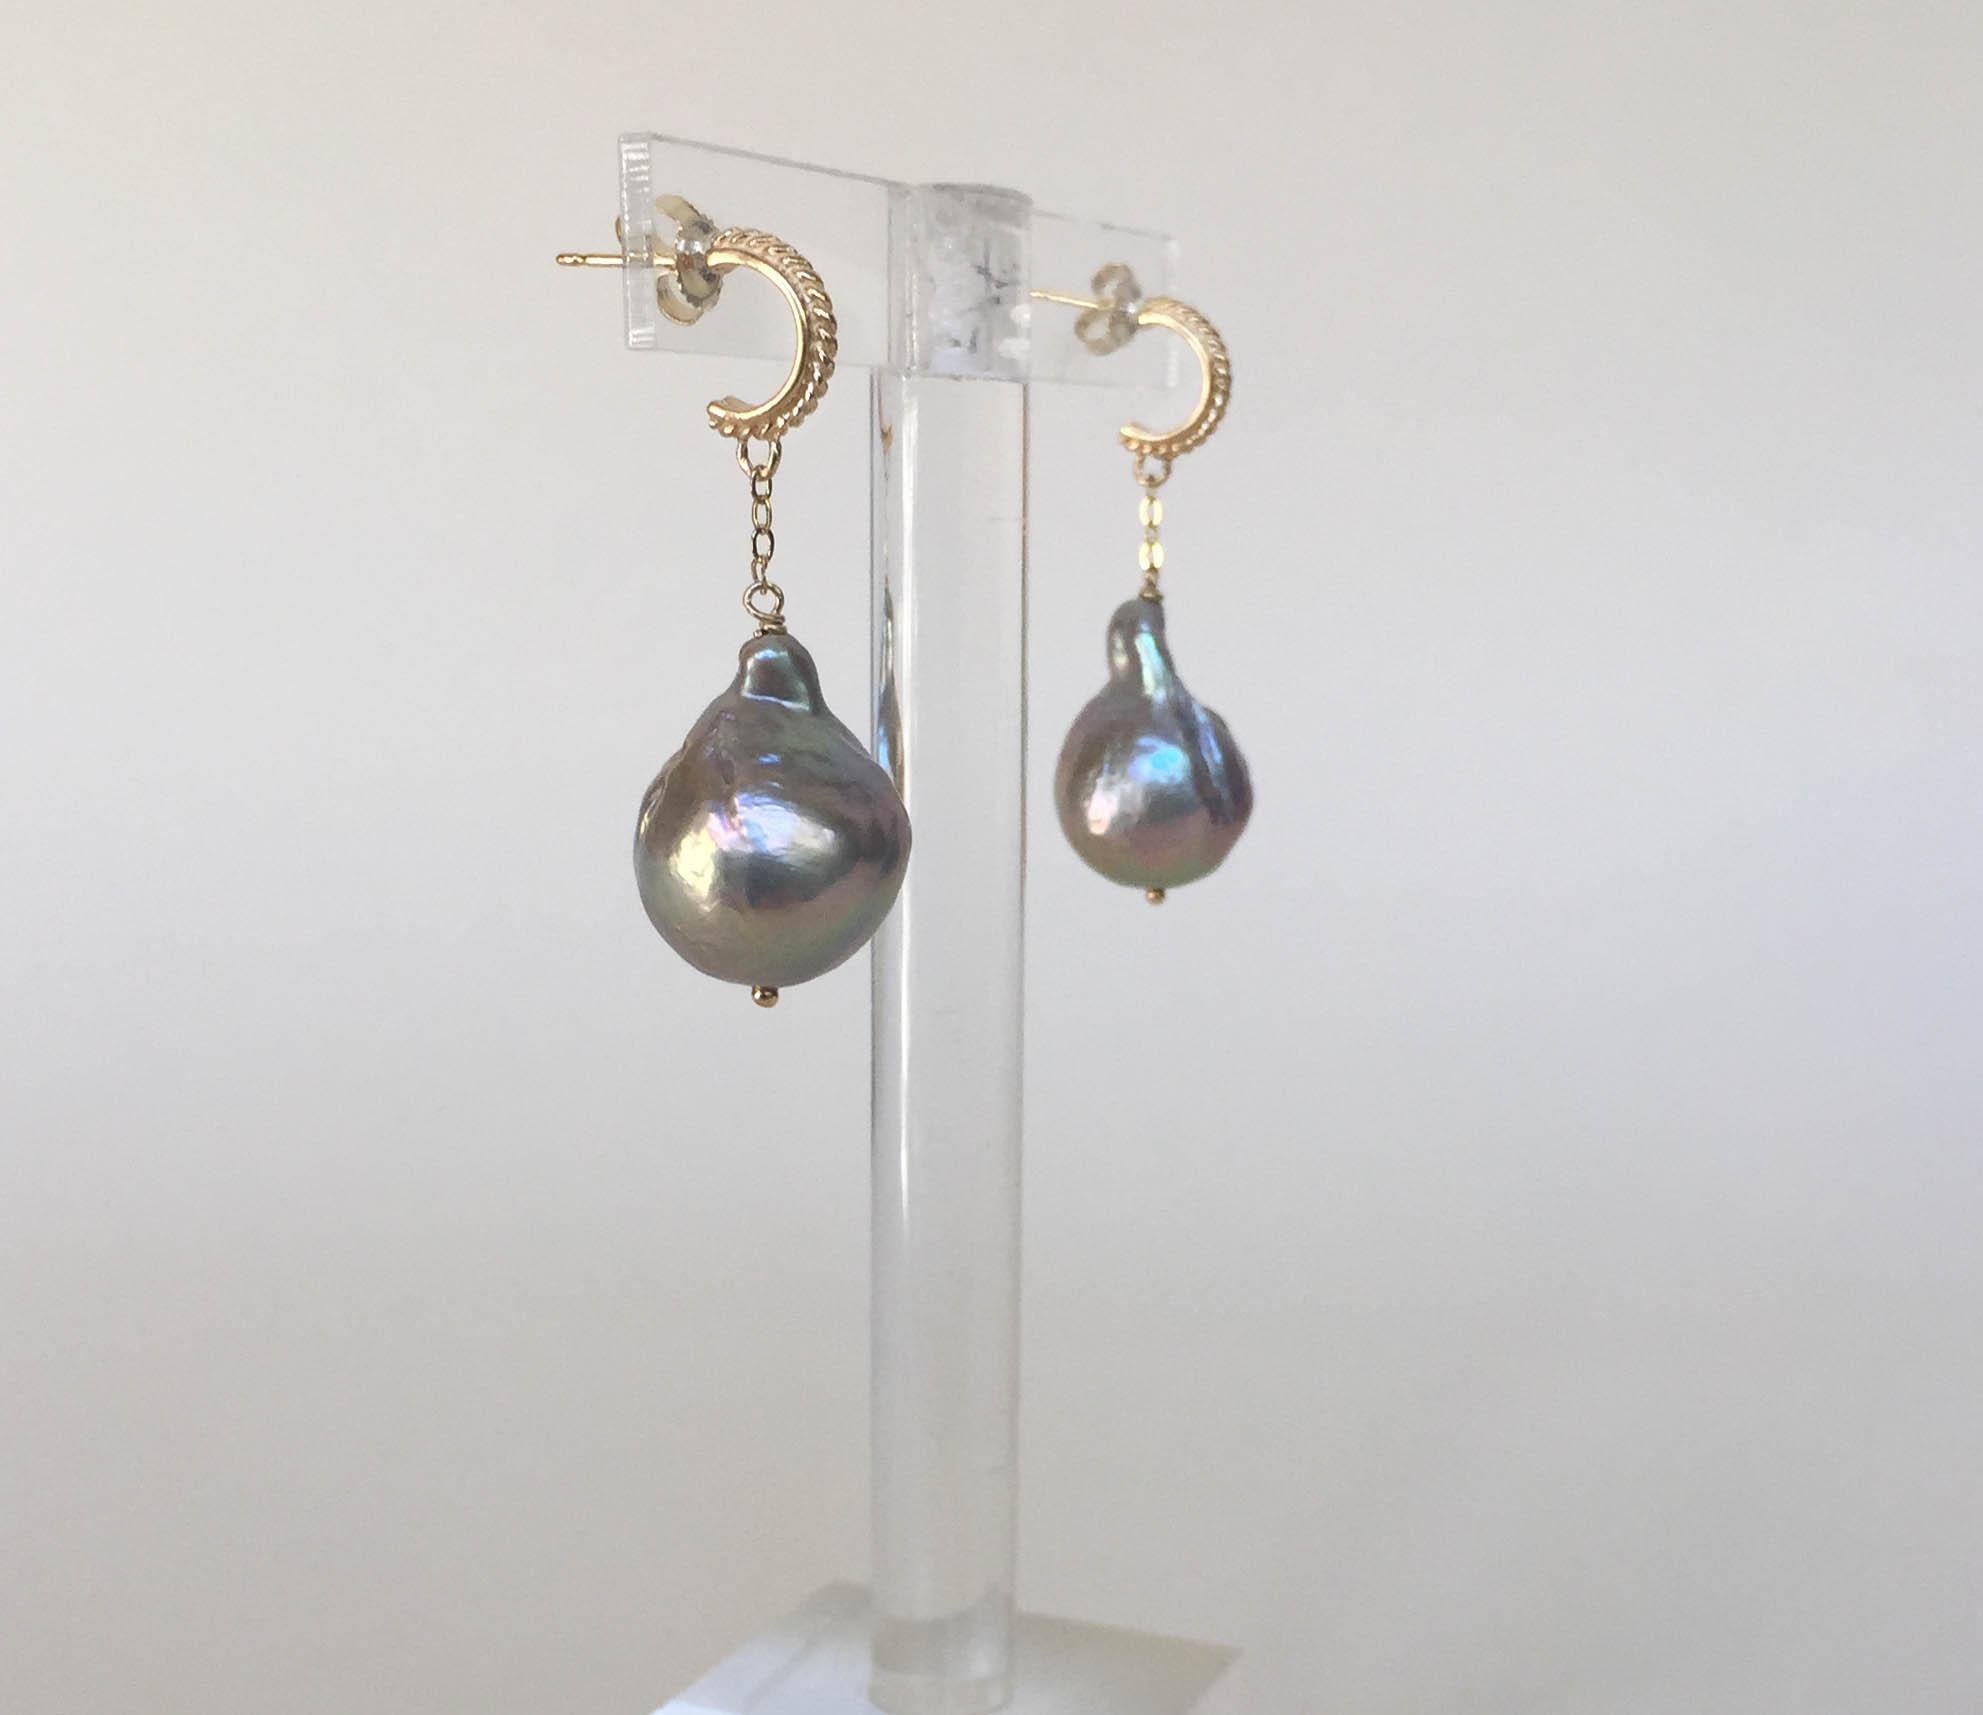 These small yet dramatic baroque gray pearl dangle earrings with 14k yellow gold stud and chain are striking with the gray and yellow gold color combination. The pearls dangle elegantly from a 14k yellow chain and detailed stud. At 1.2 inches these